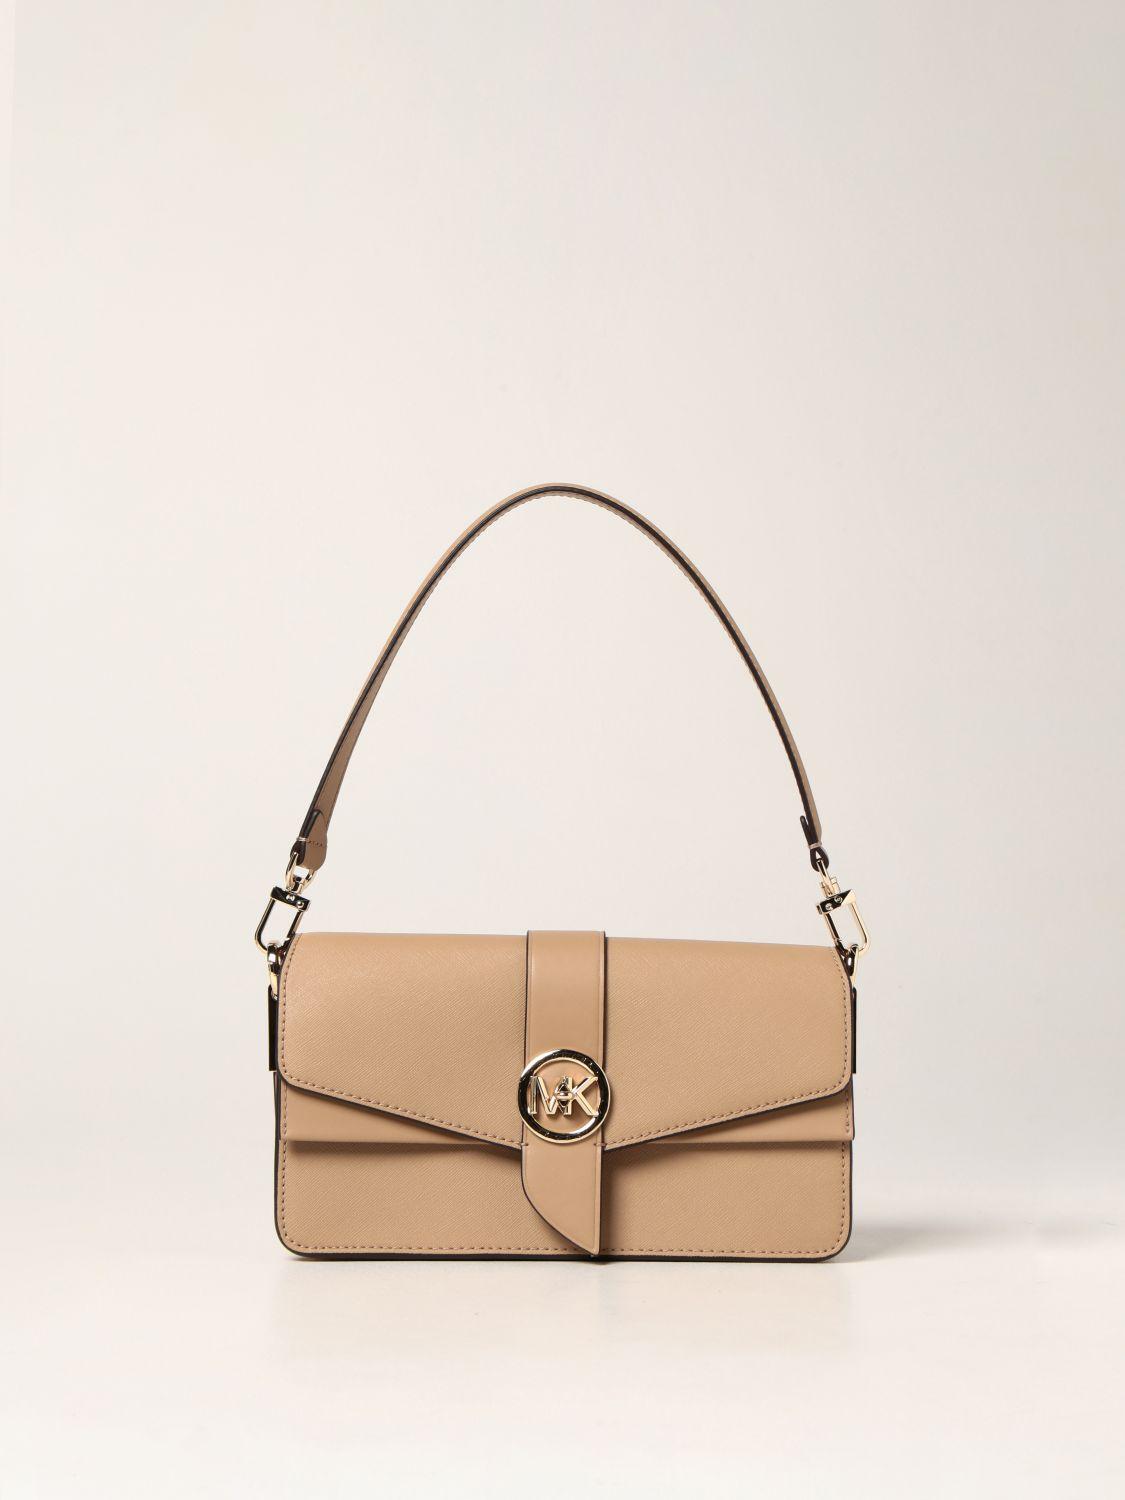 Michael Kors Greenwich Michael Bag In Saffiano Leather in Camel 